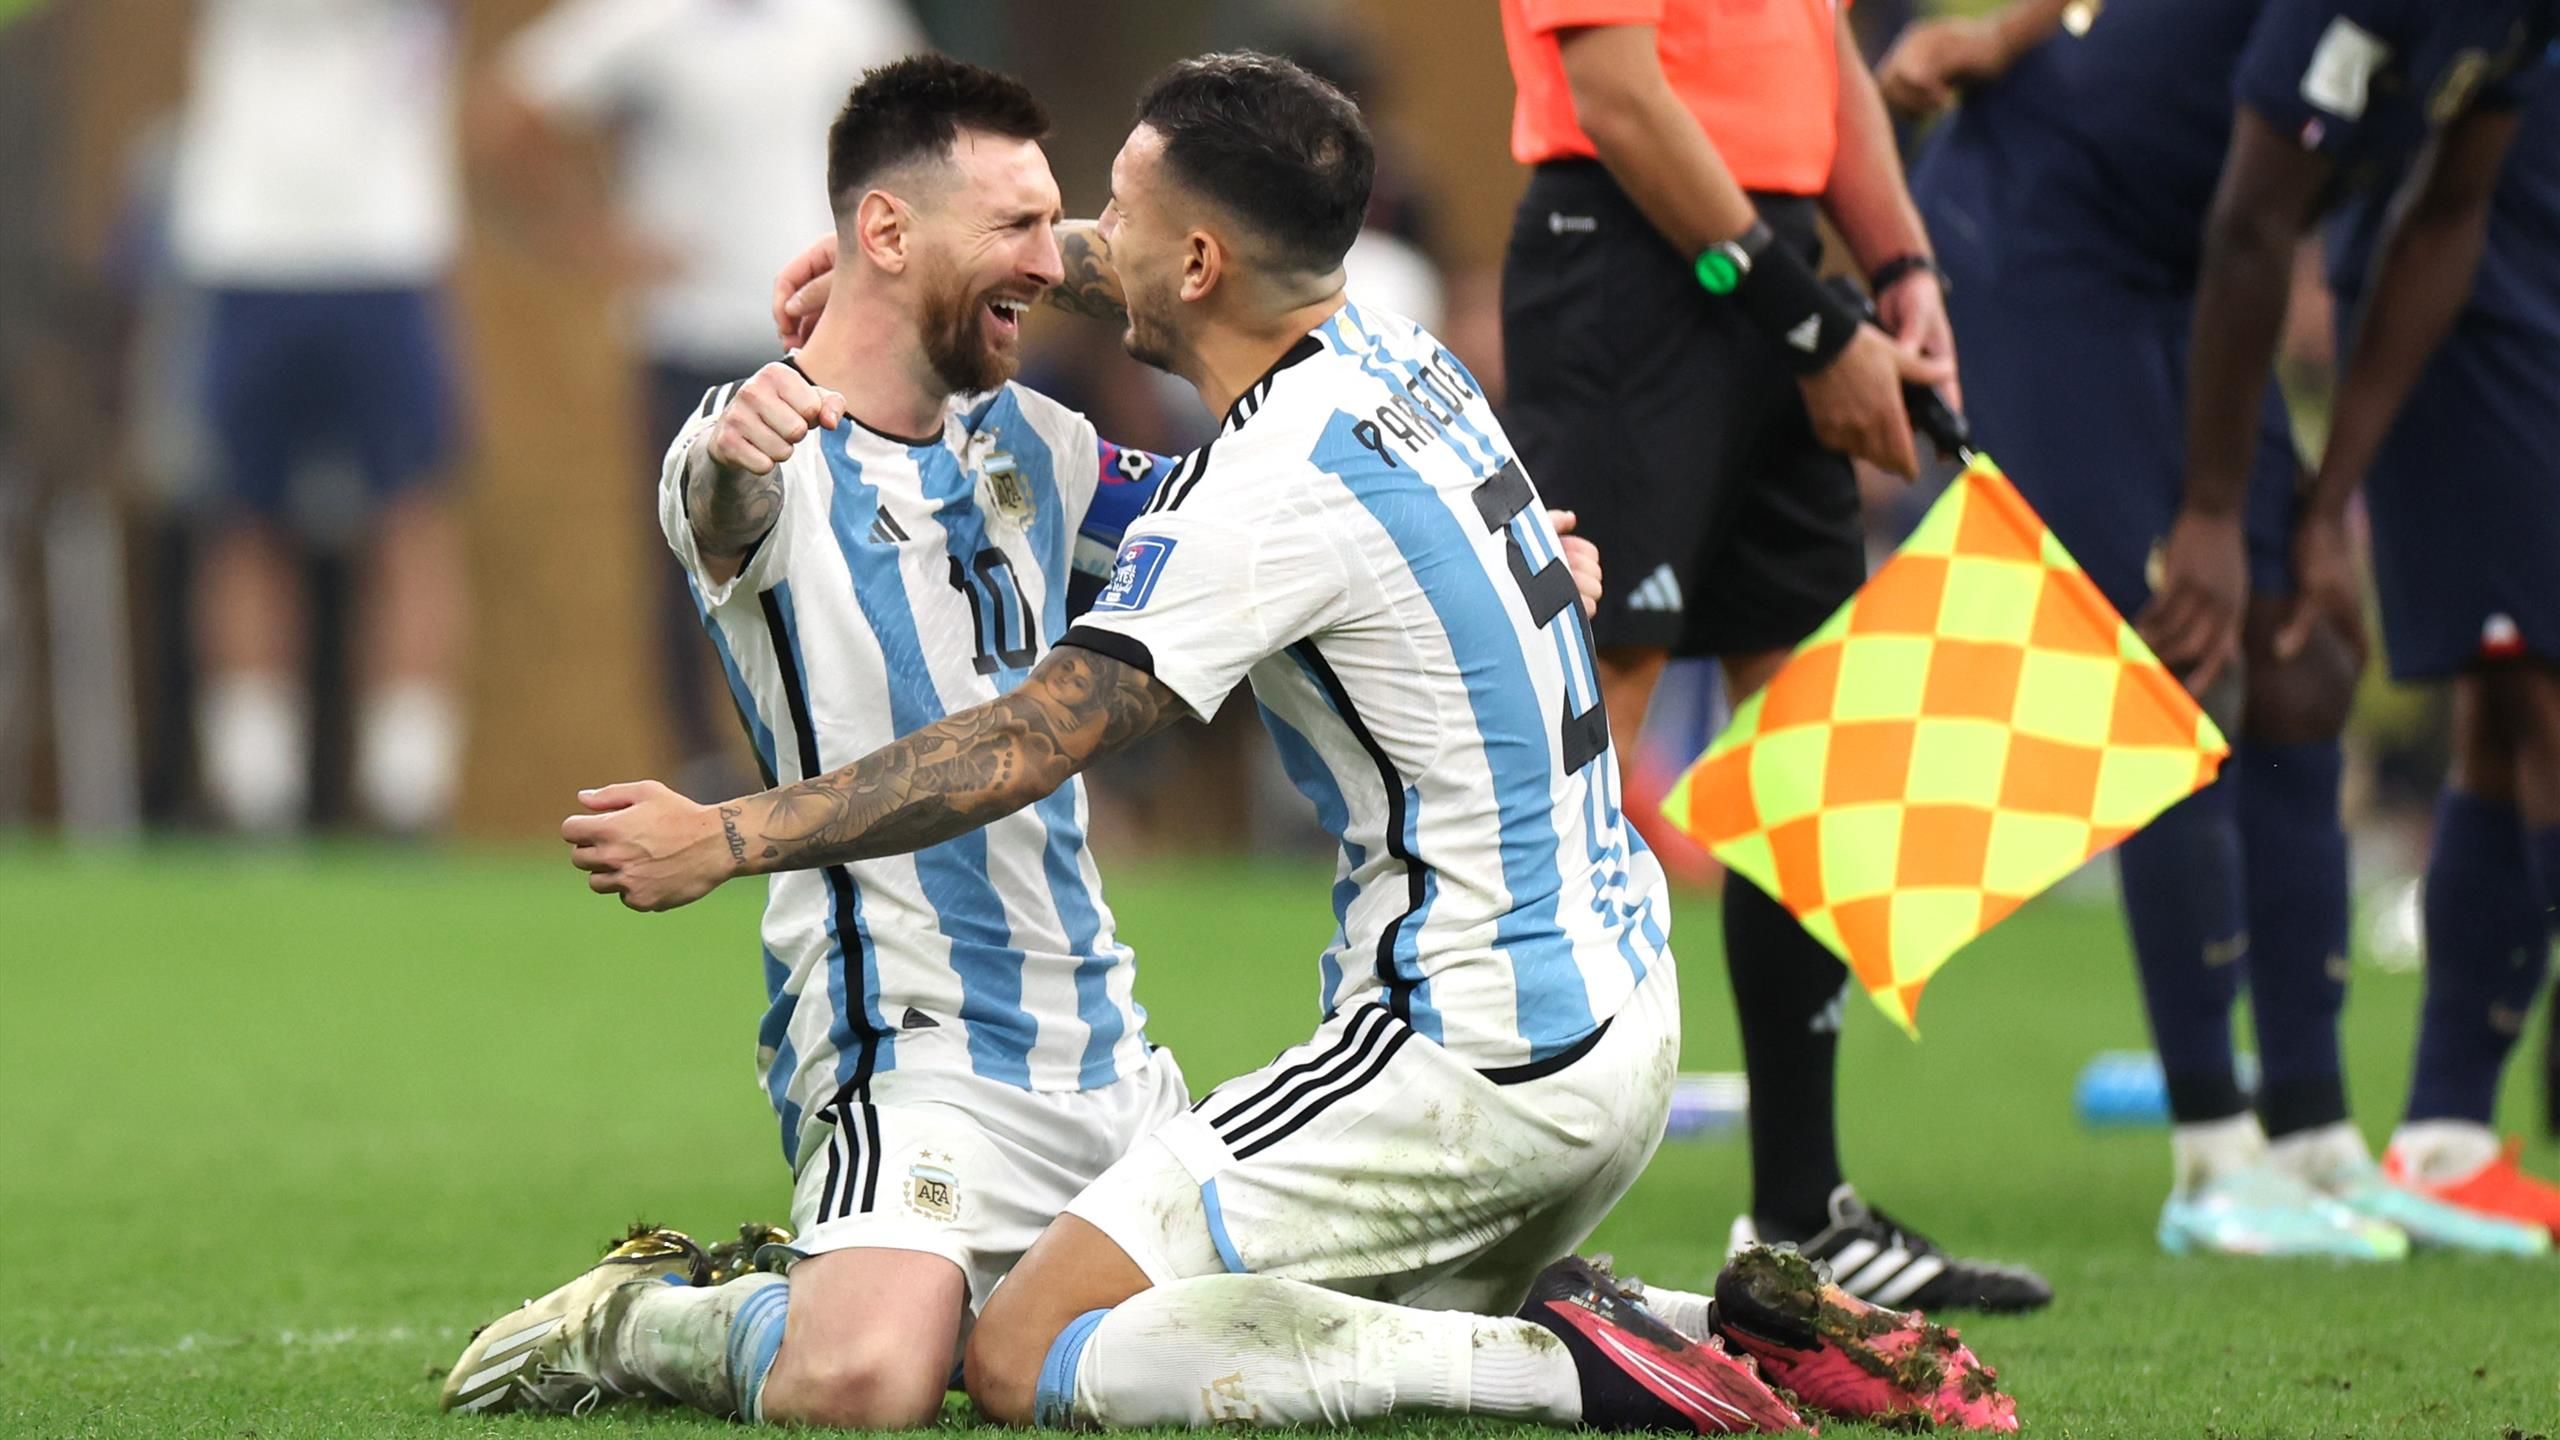 Lionel Messi: Argentina star reacts to 'spectacular' win to make World Cup  final